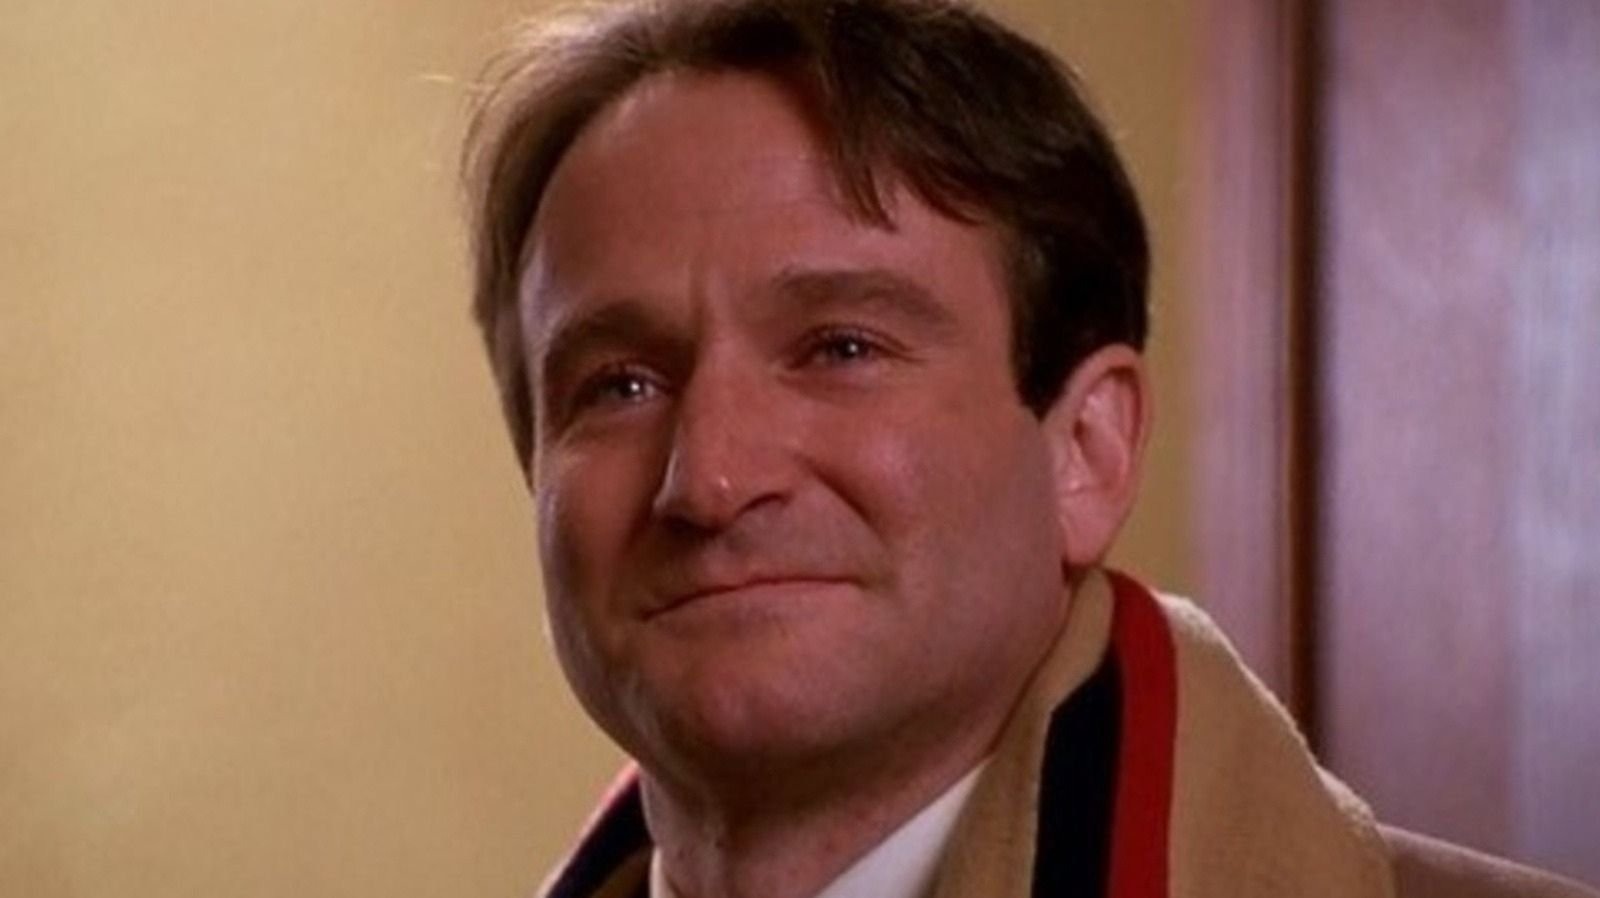 Late Hollywood actor Robin Williams